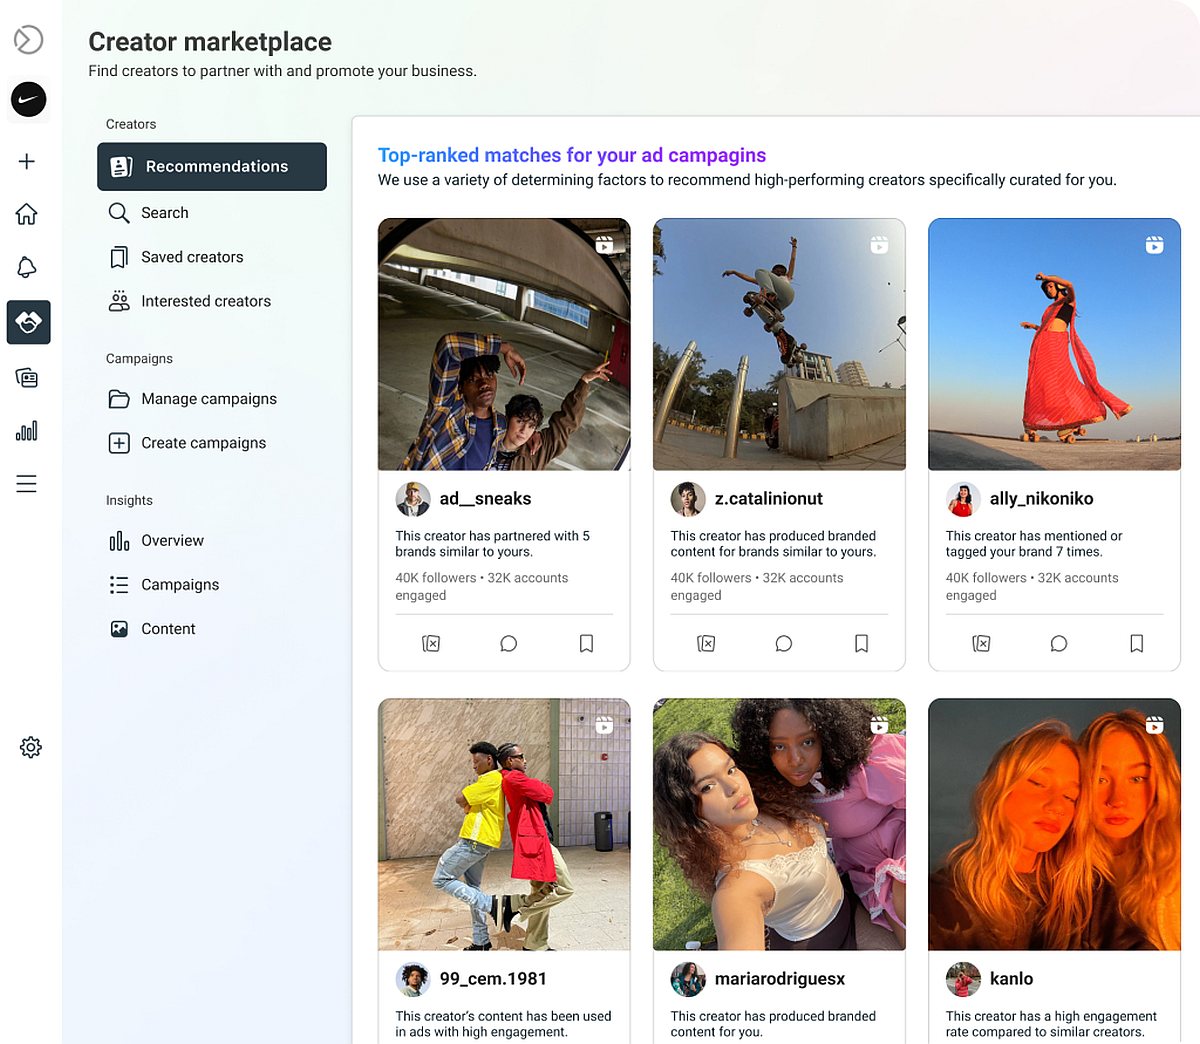 Instagram Creator Marketplace Expands to India; Meta Tests AI-Powered Creator Recommendations